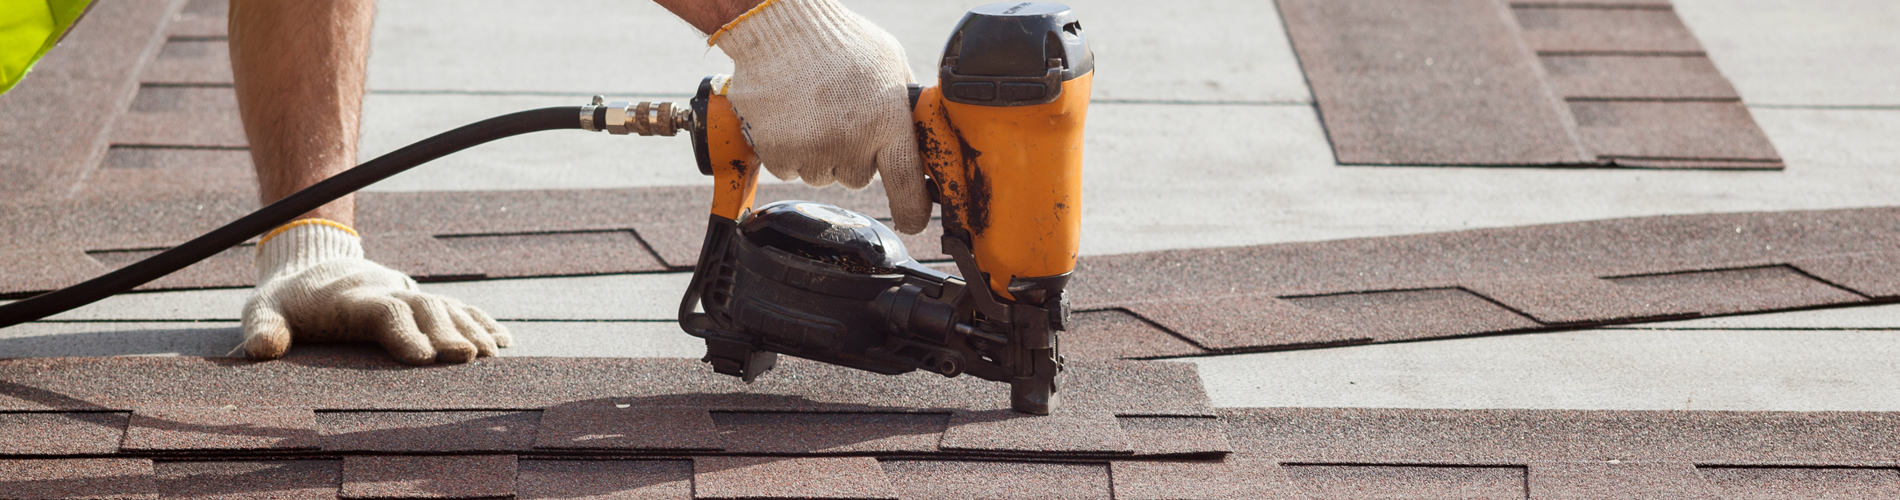 Close up shot of a worker with gloves installing new shingles on a residential roof with a nail gun